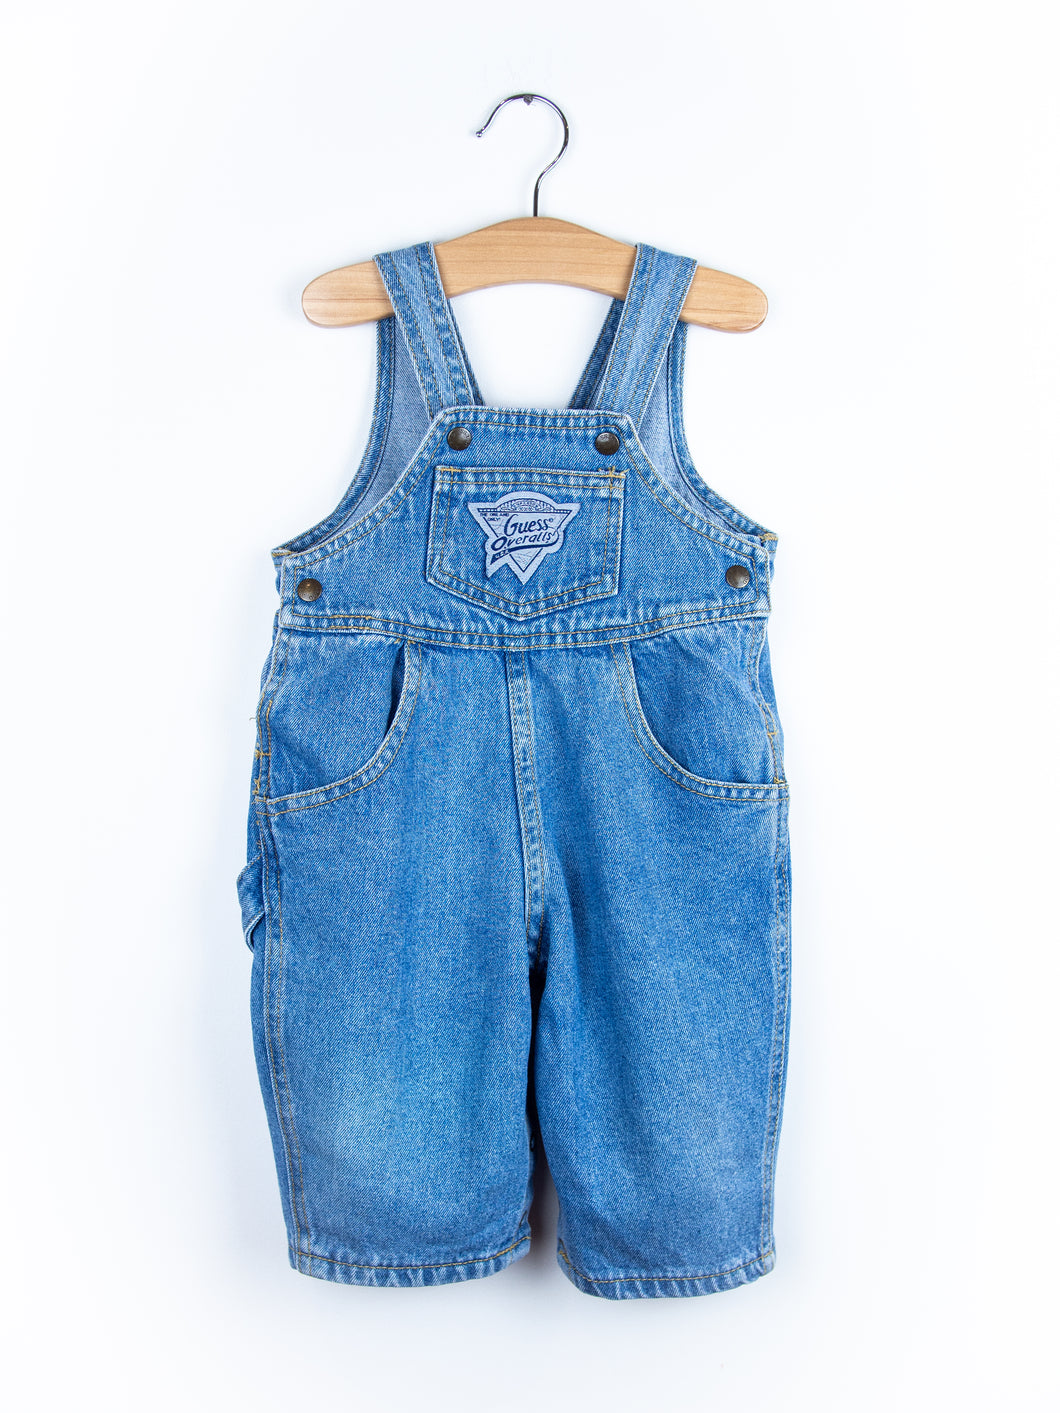 Guess Denim Dungarees - Age 6 months